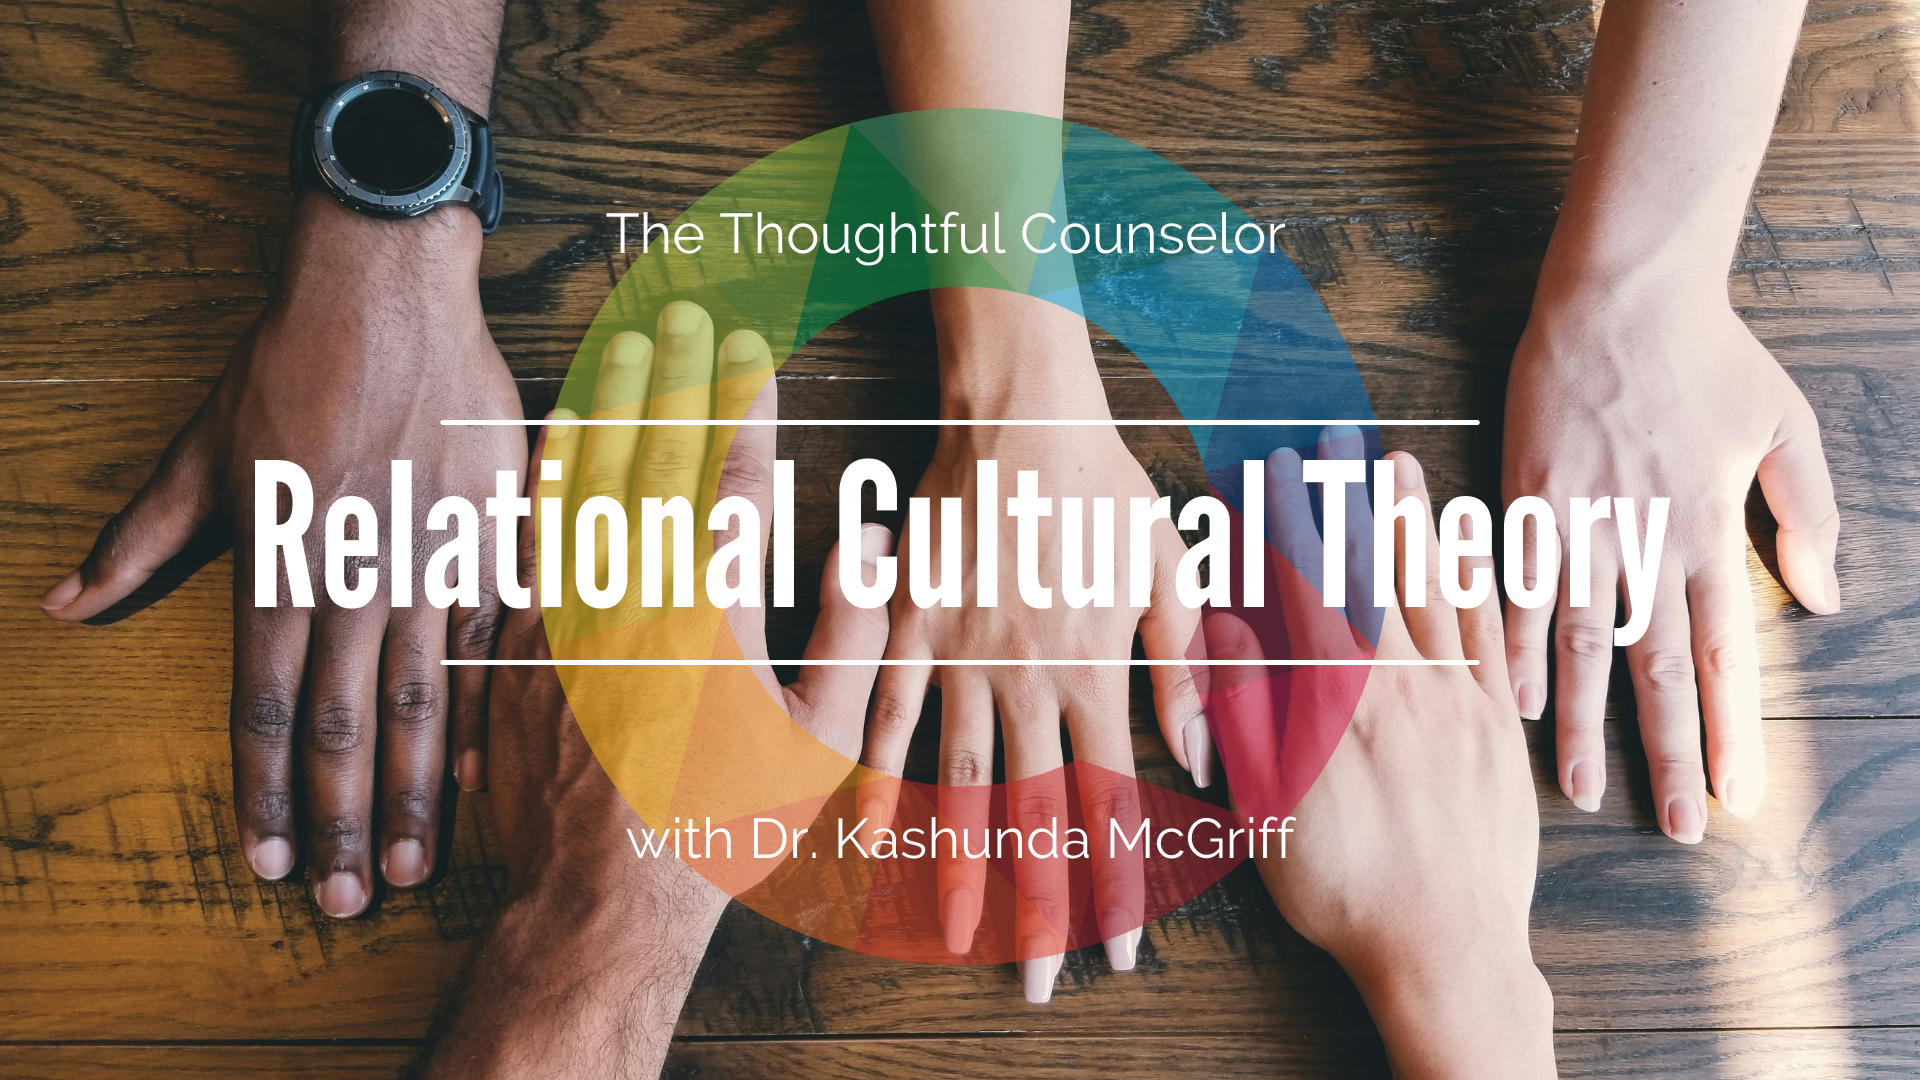 Relational Cultural Theory: Moving Towards Connection